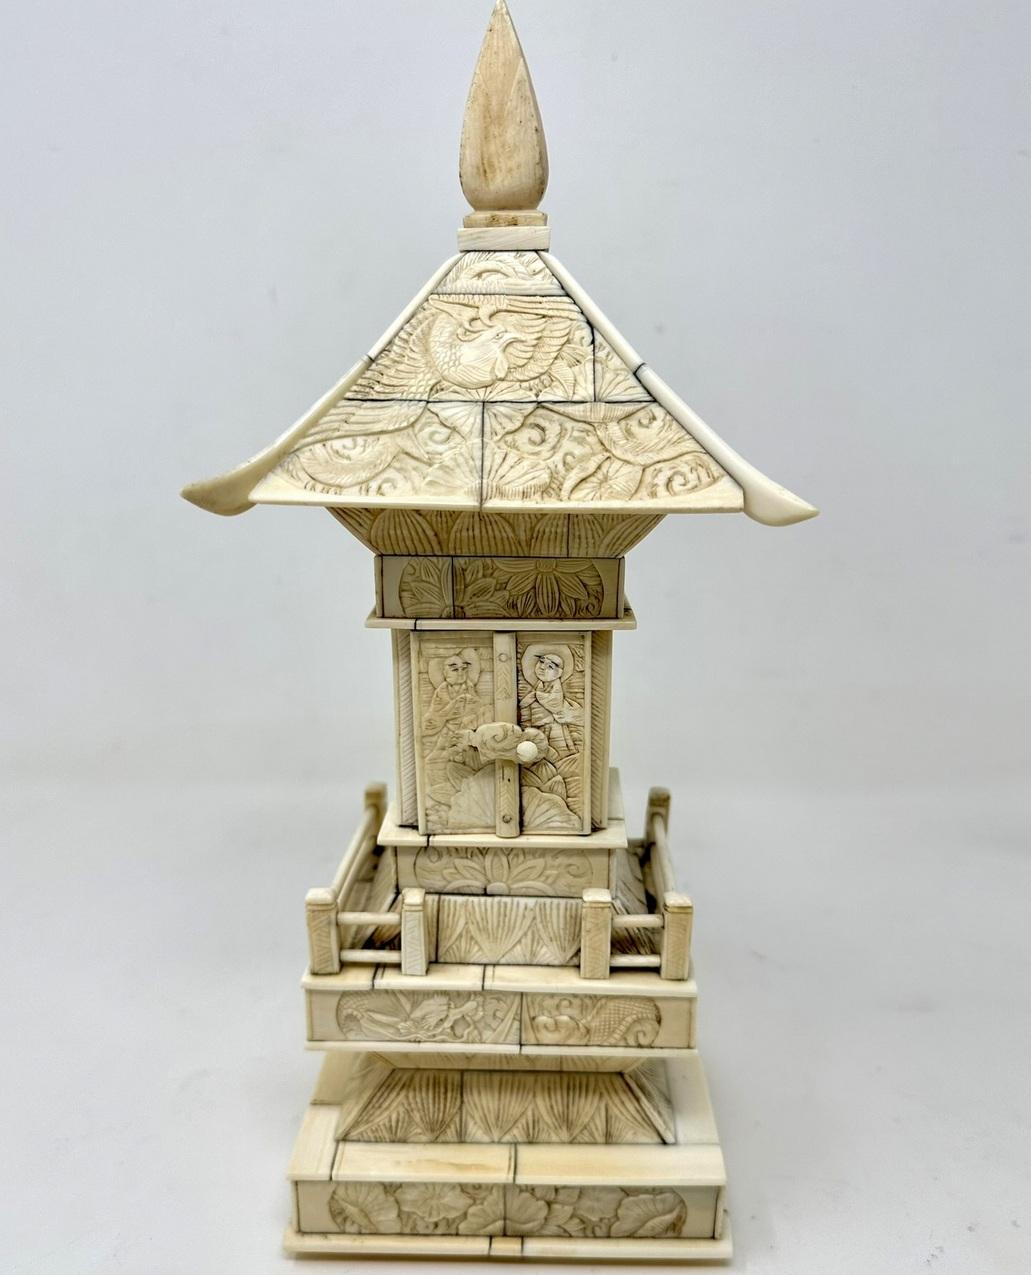 A Very Fine Quality Chinese Export Hand Carved Religous Pagoda of traditional architectural form and generous proportions, late Nineteenth Century. 

The overall structure beautifully carved depicting Chinese figures, scrolling detail and various